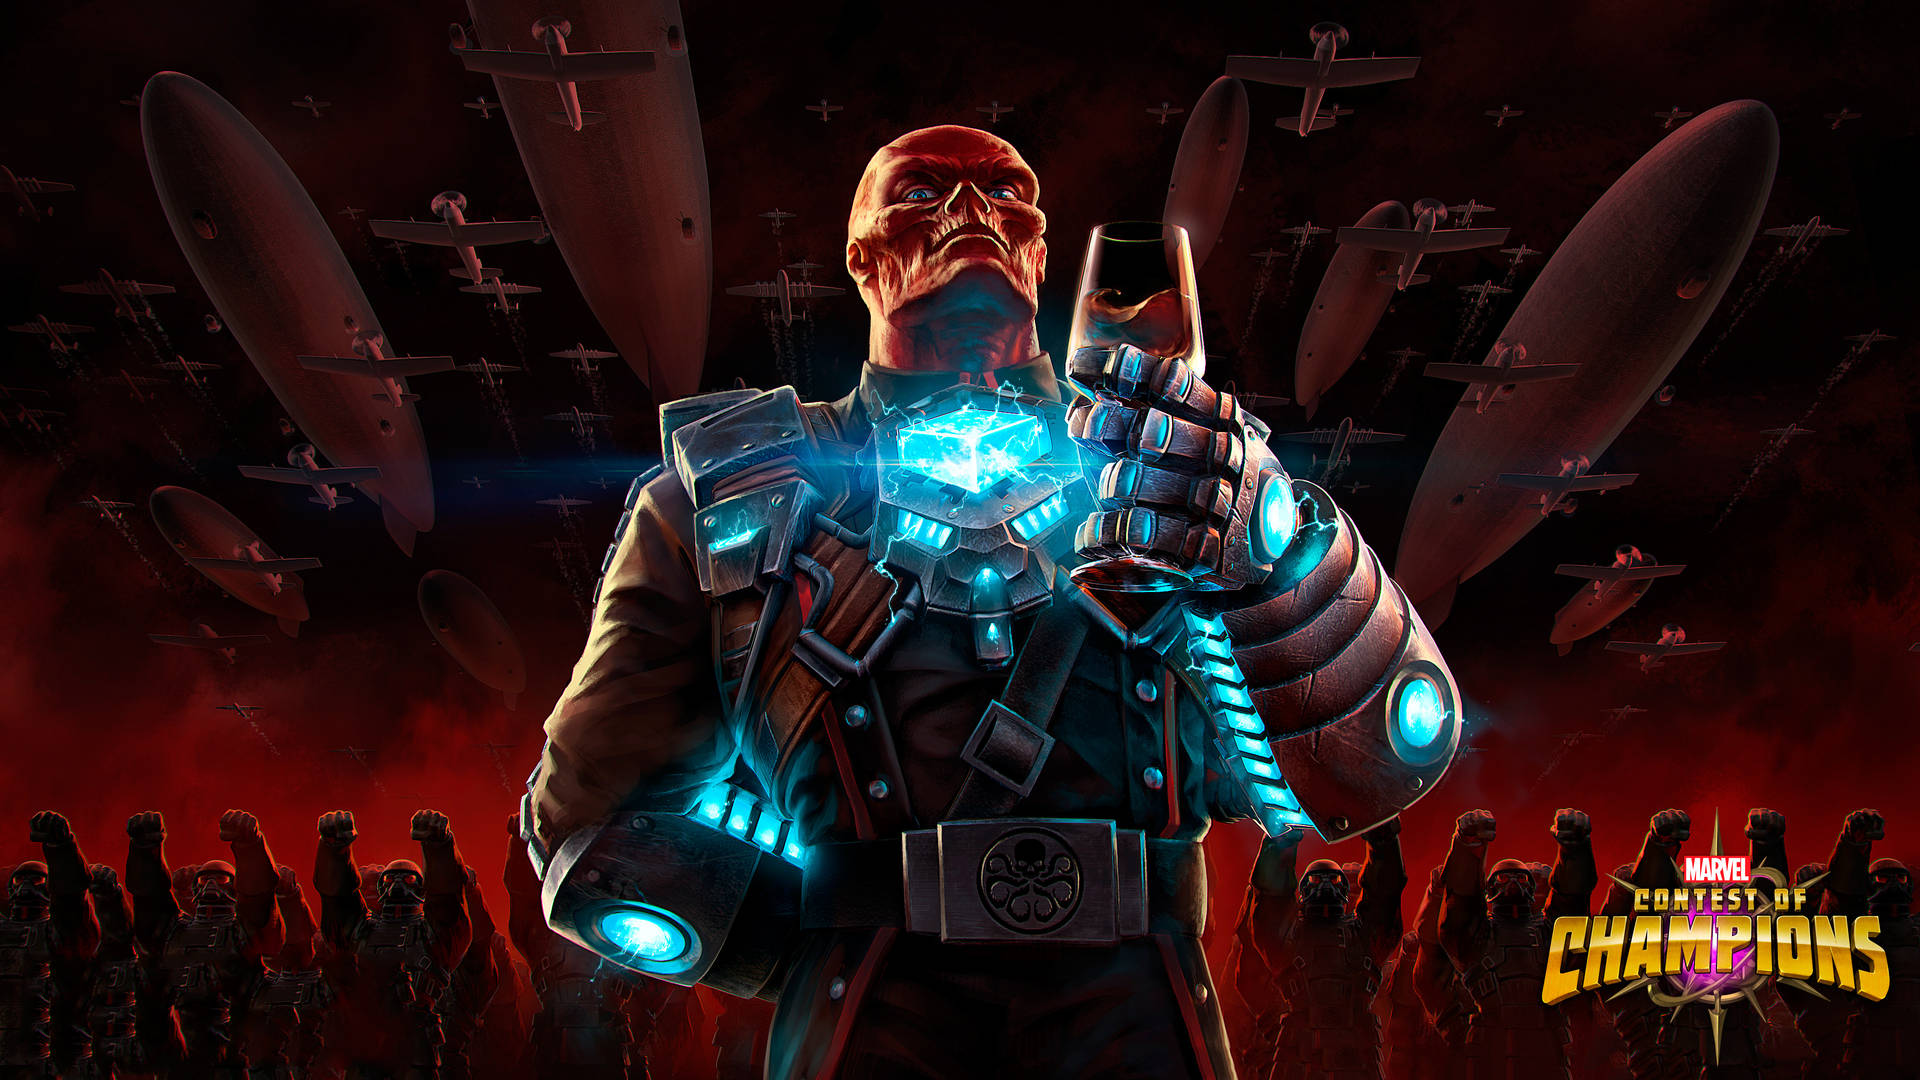 Red Skull Contest Of Champions Background